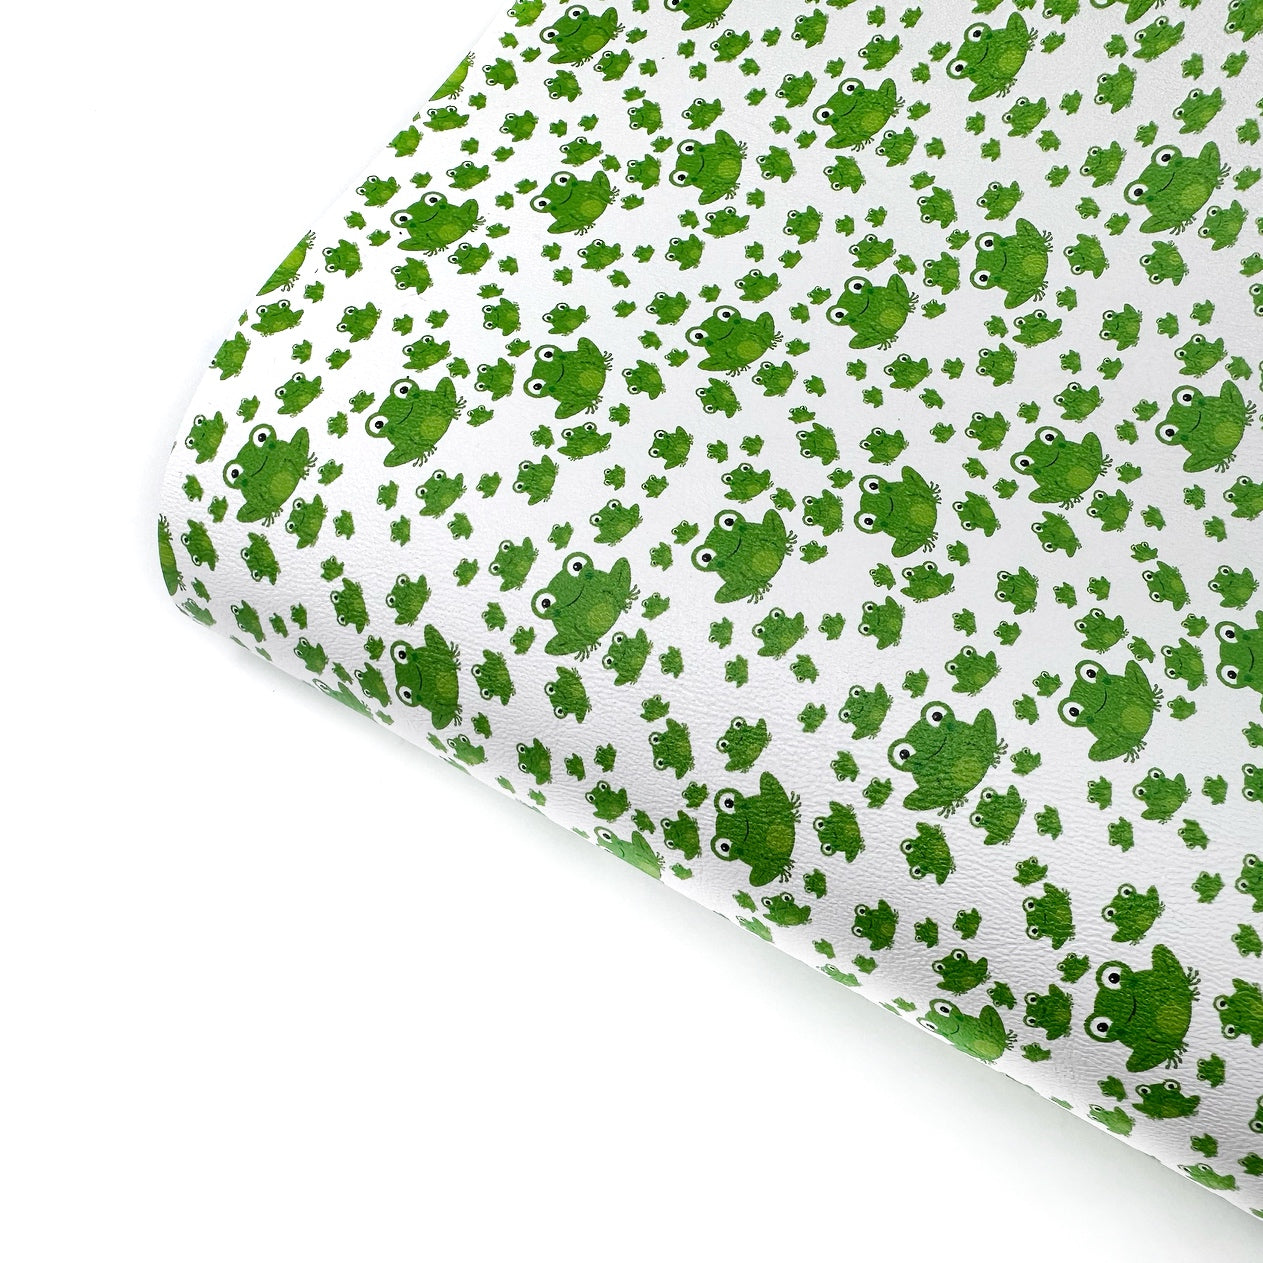 Too Many Frogs Premium Faux Leather Fabric Sheets